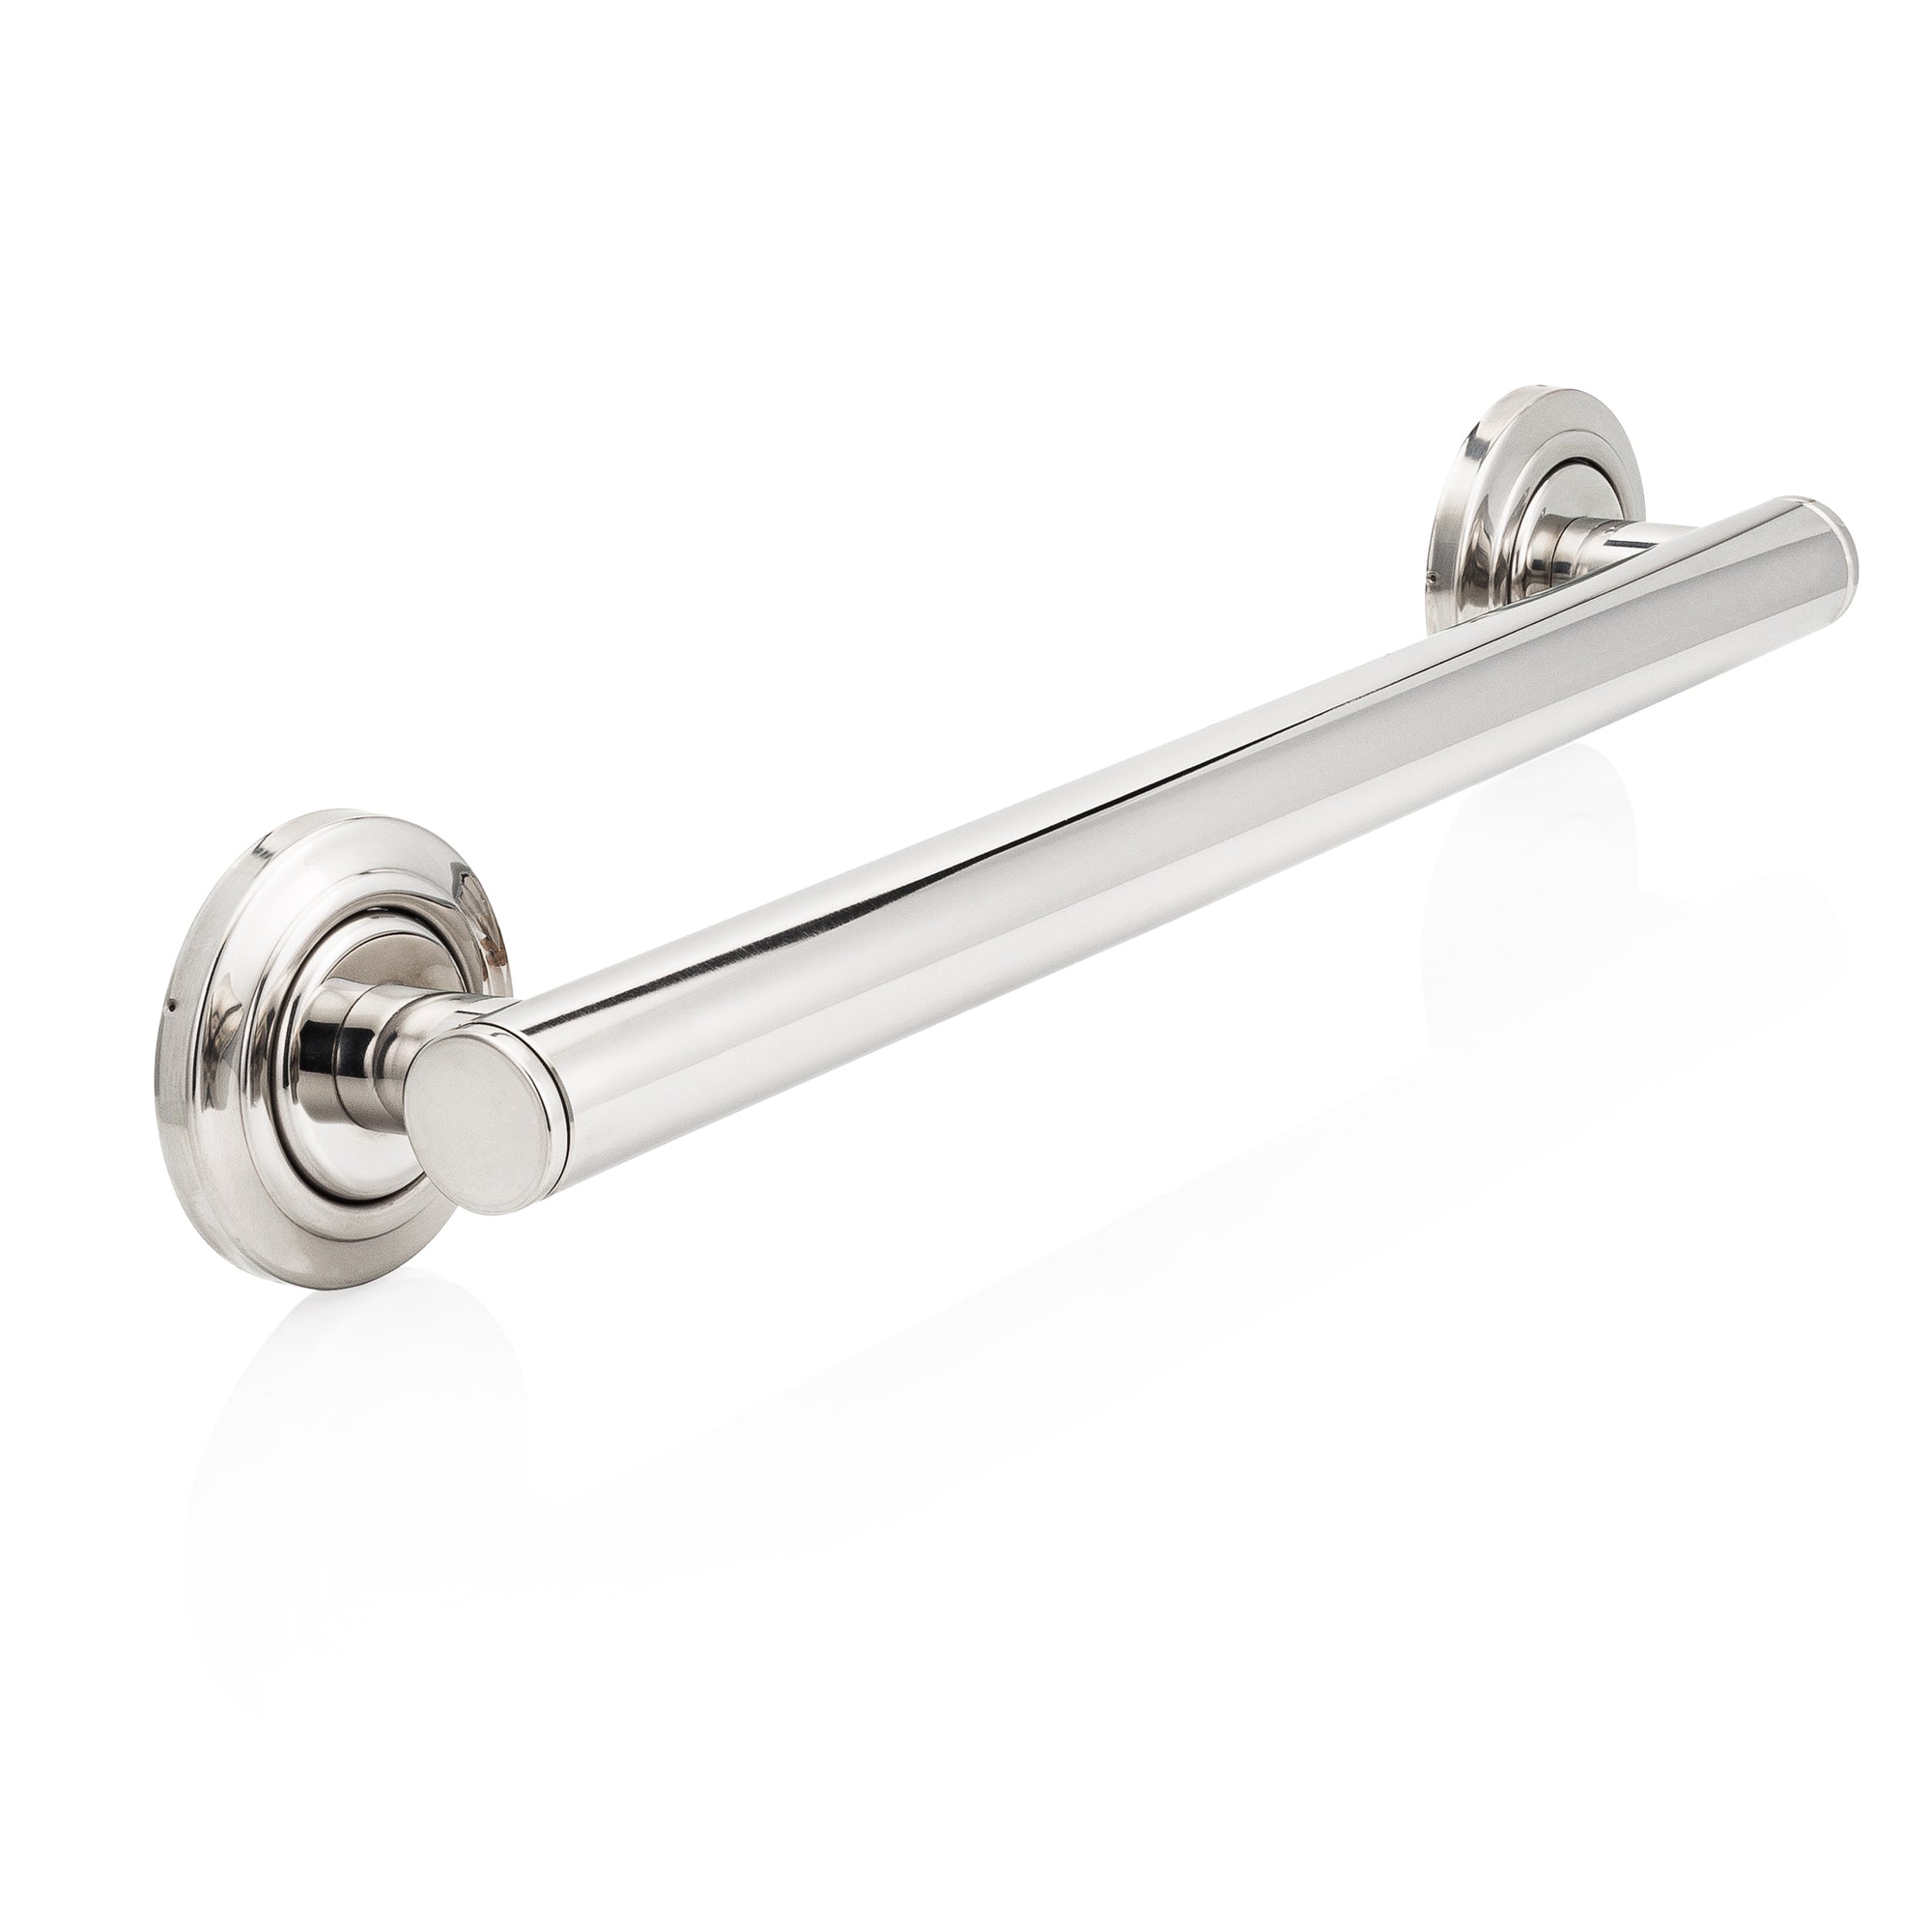 How Designer Grab Bars Can Enhance Accessibility without Sacrificing Aesthetics